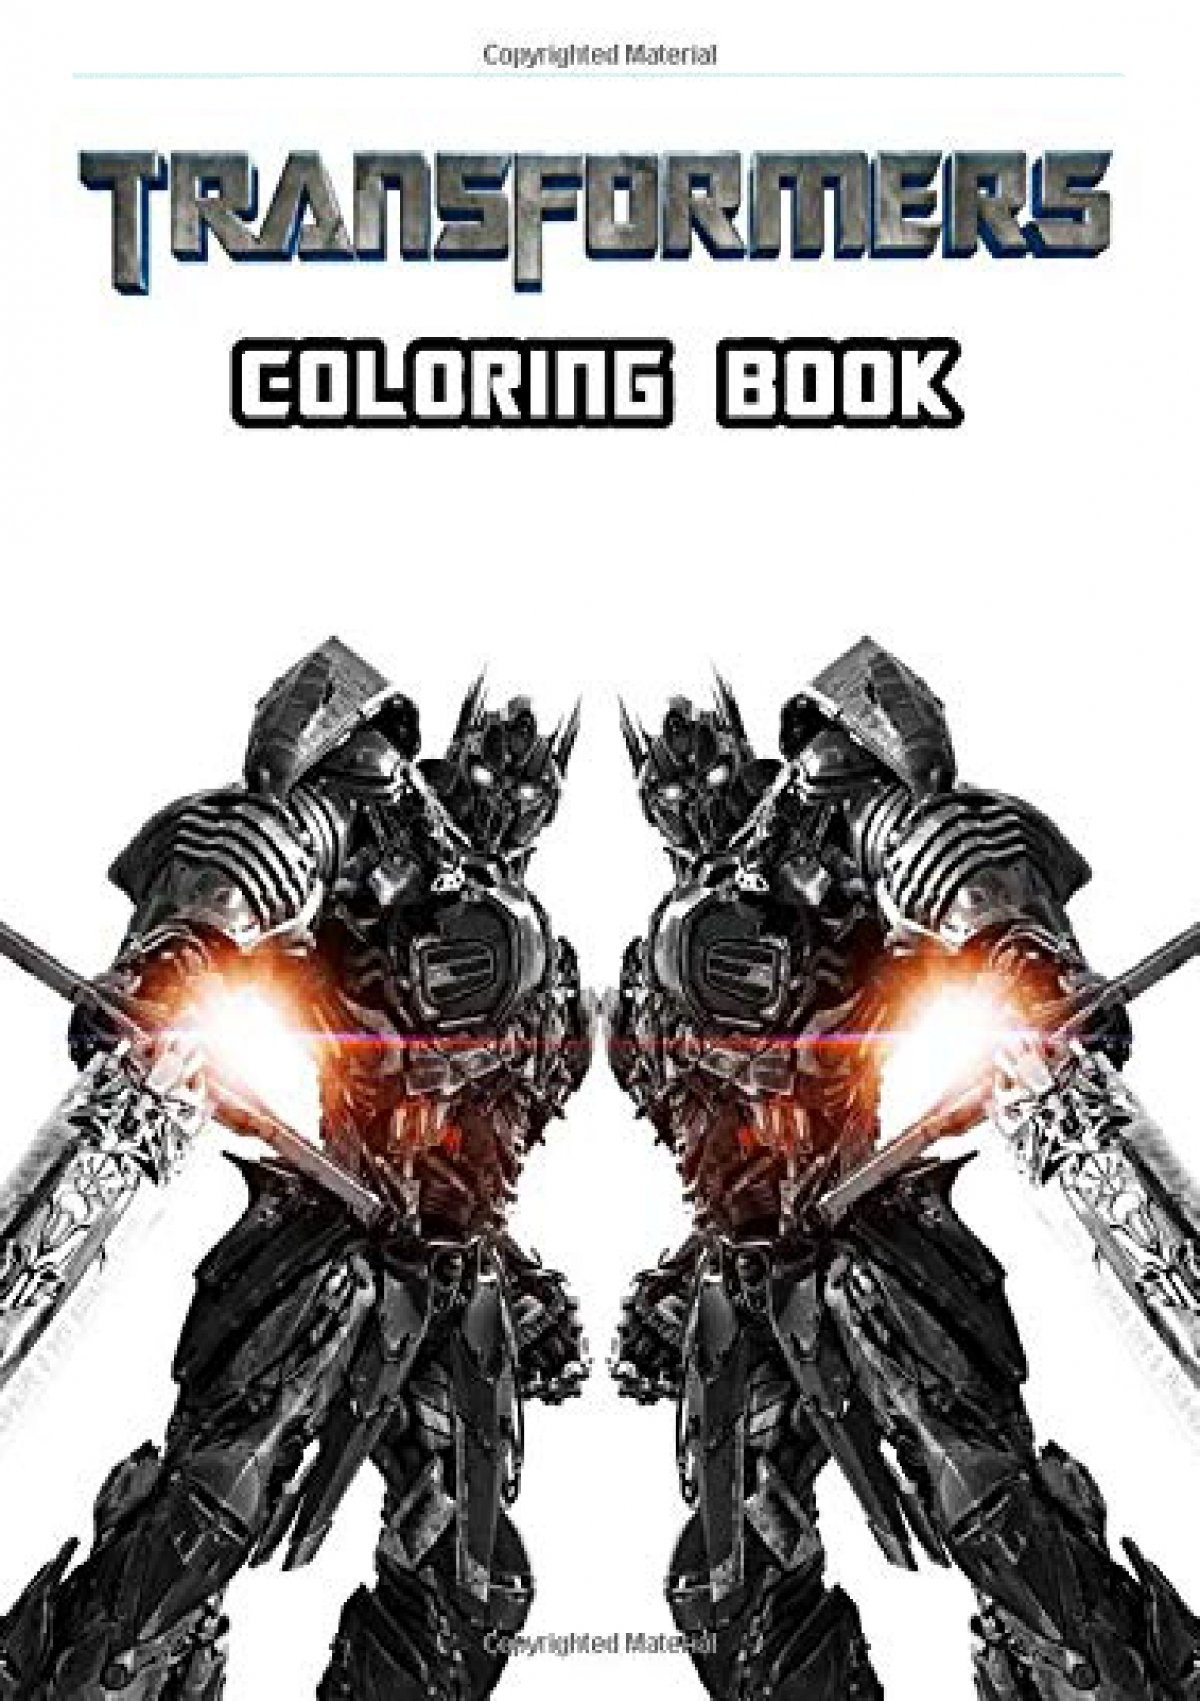 Download Pdf Transformers Coloring Book Great Books For Any Fans Of Transformers With 50 Coloring Pages Kindle